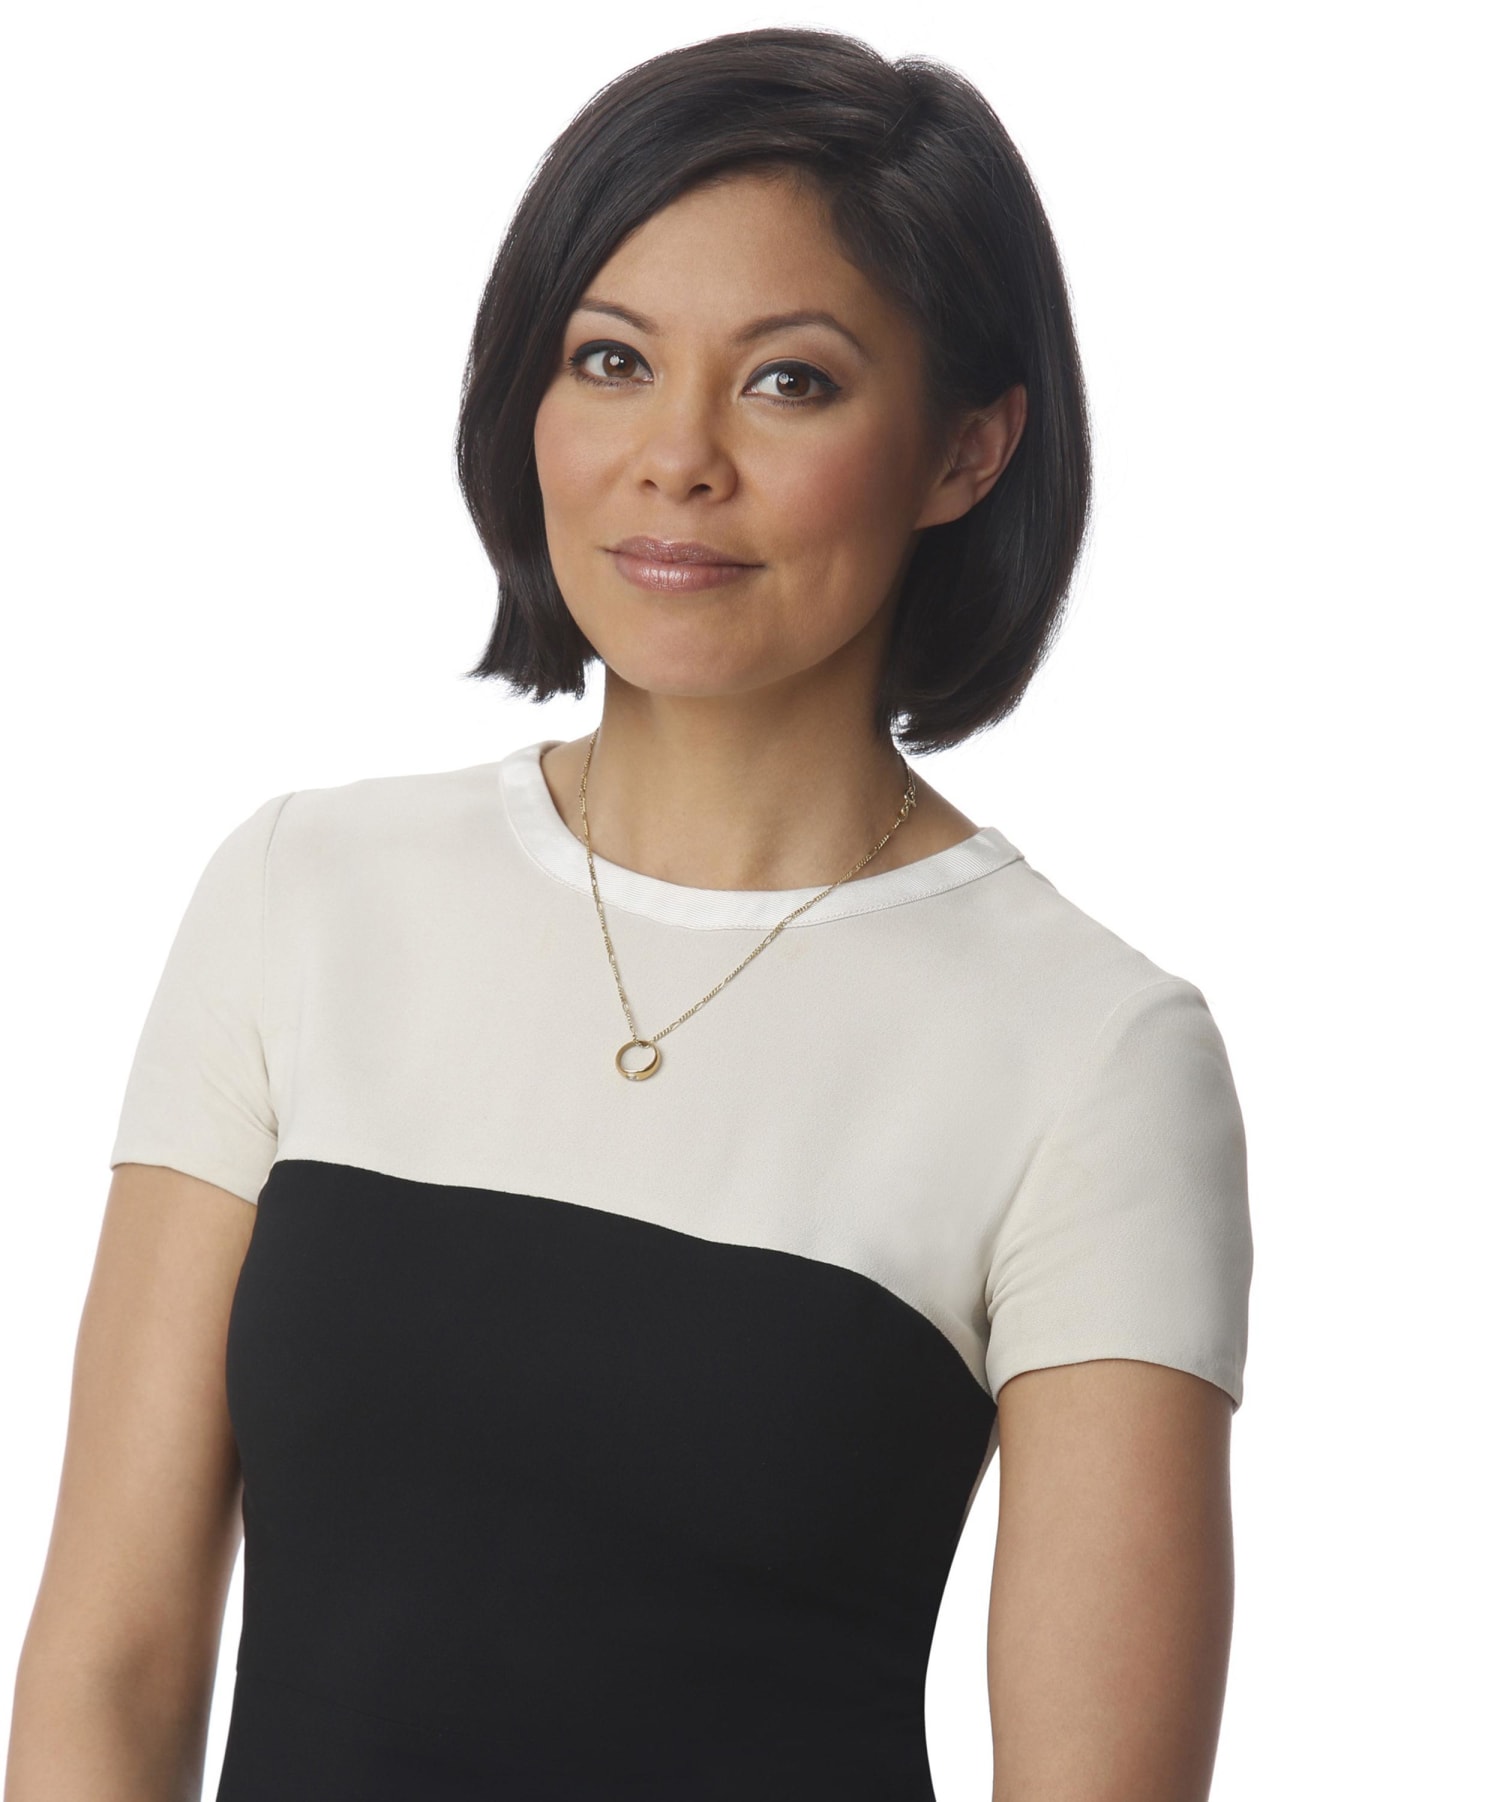 Apps I Live By MSNBC Host Alex Wagner NBC News